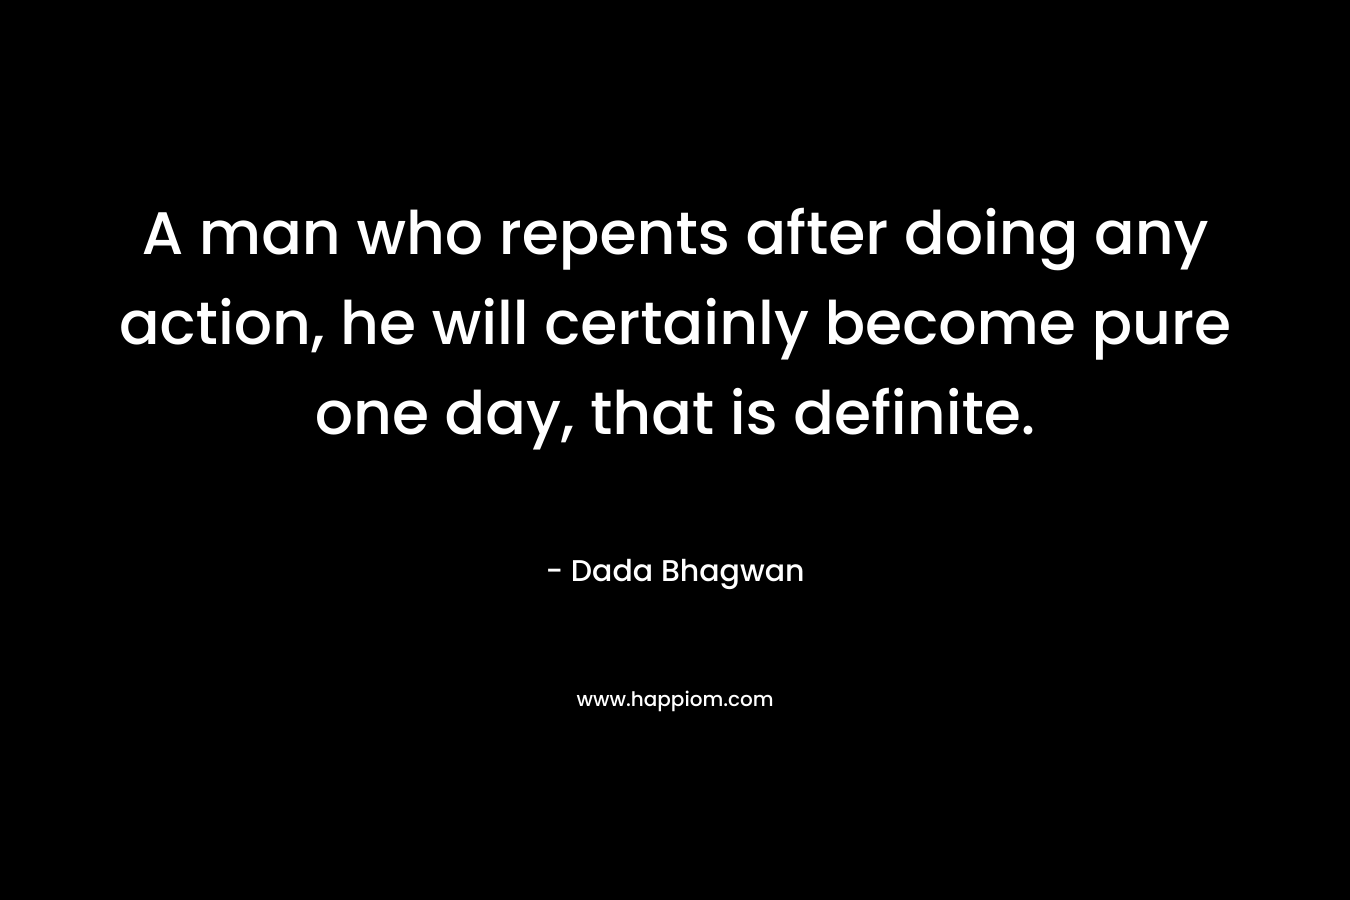 A man who repents after doing any action, he will certainly become pure one day, that is definite. – Dada Bhagwan